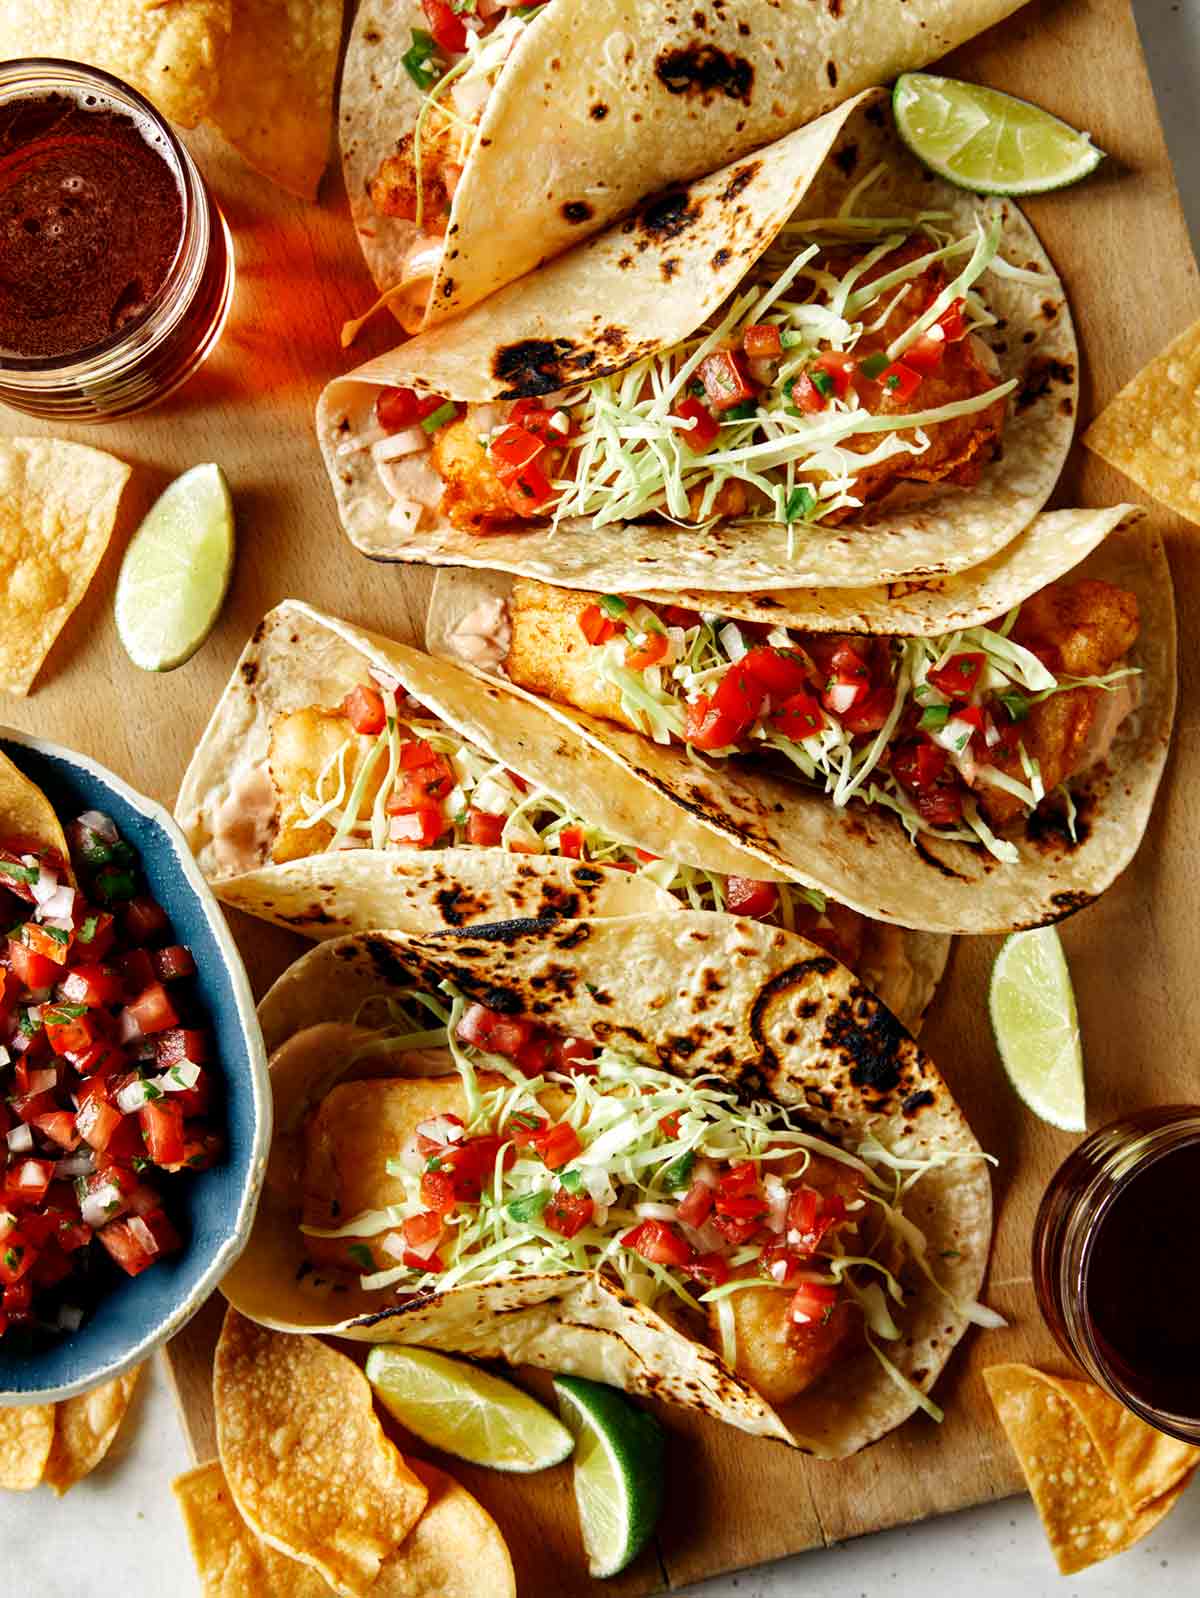 Baja fish tacos recipe with beer on the side. 